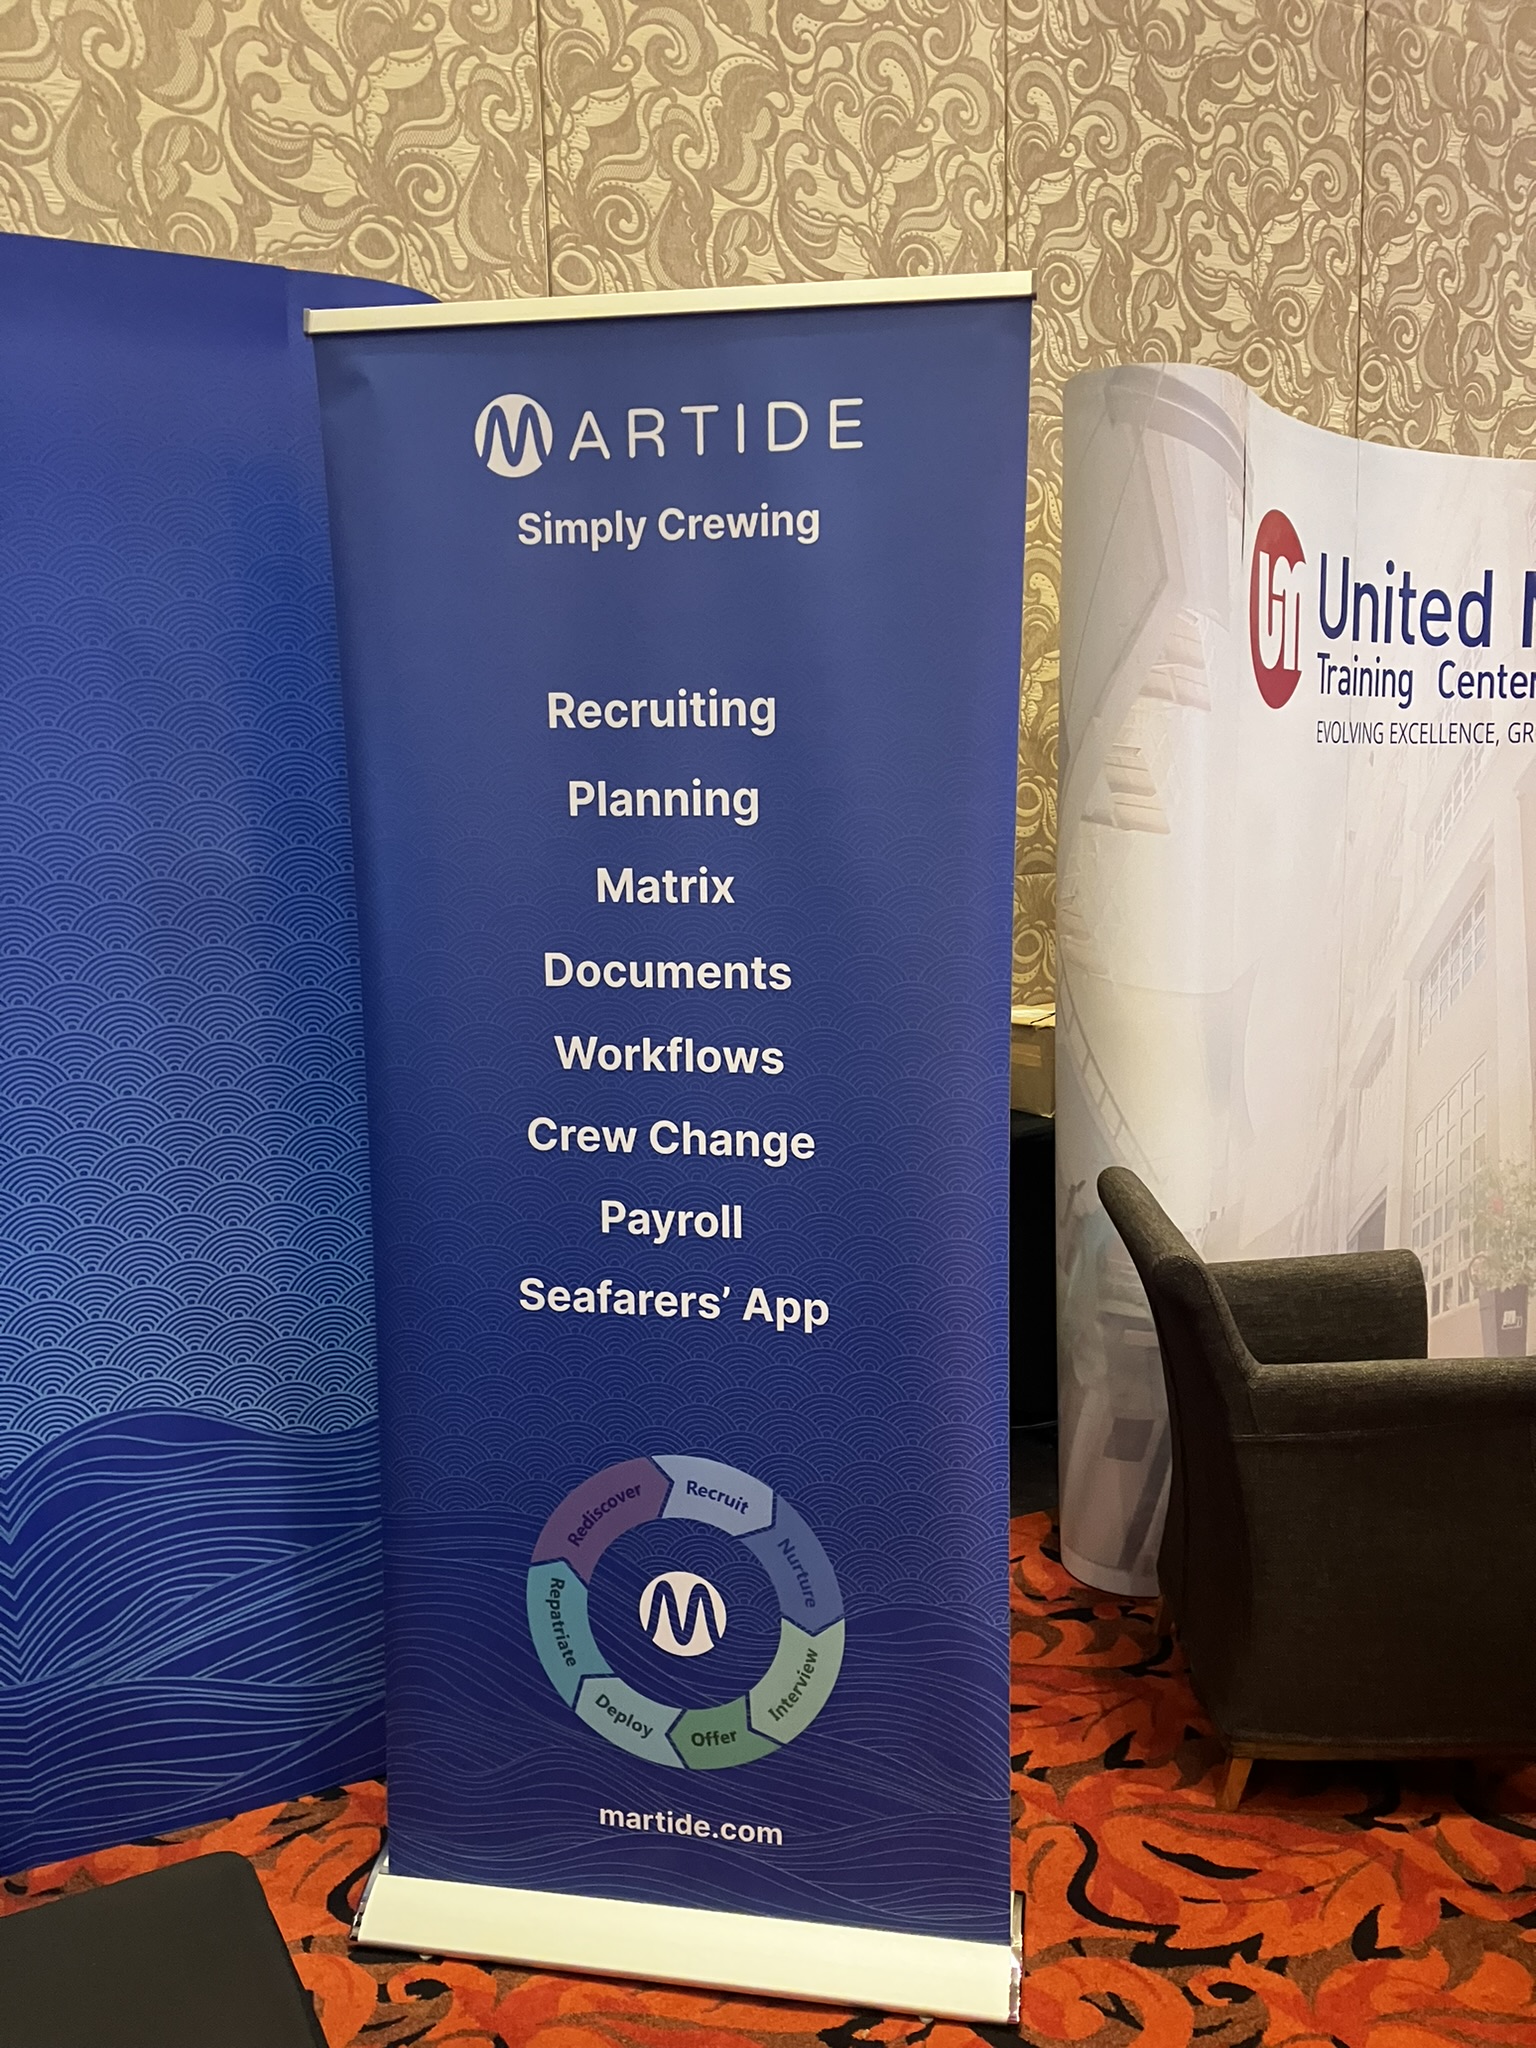 The Martide booth's banner showing our crewing system features